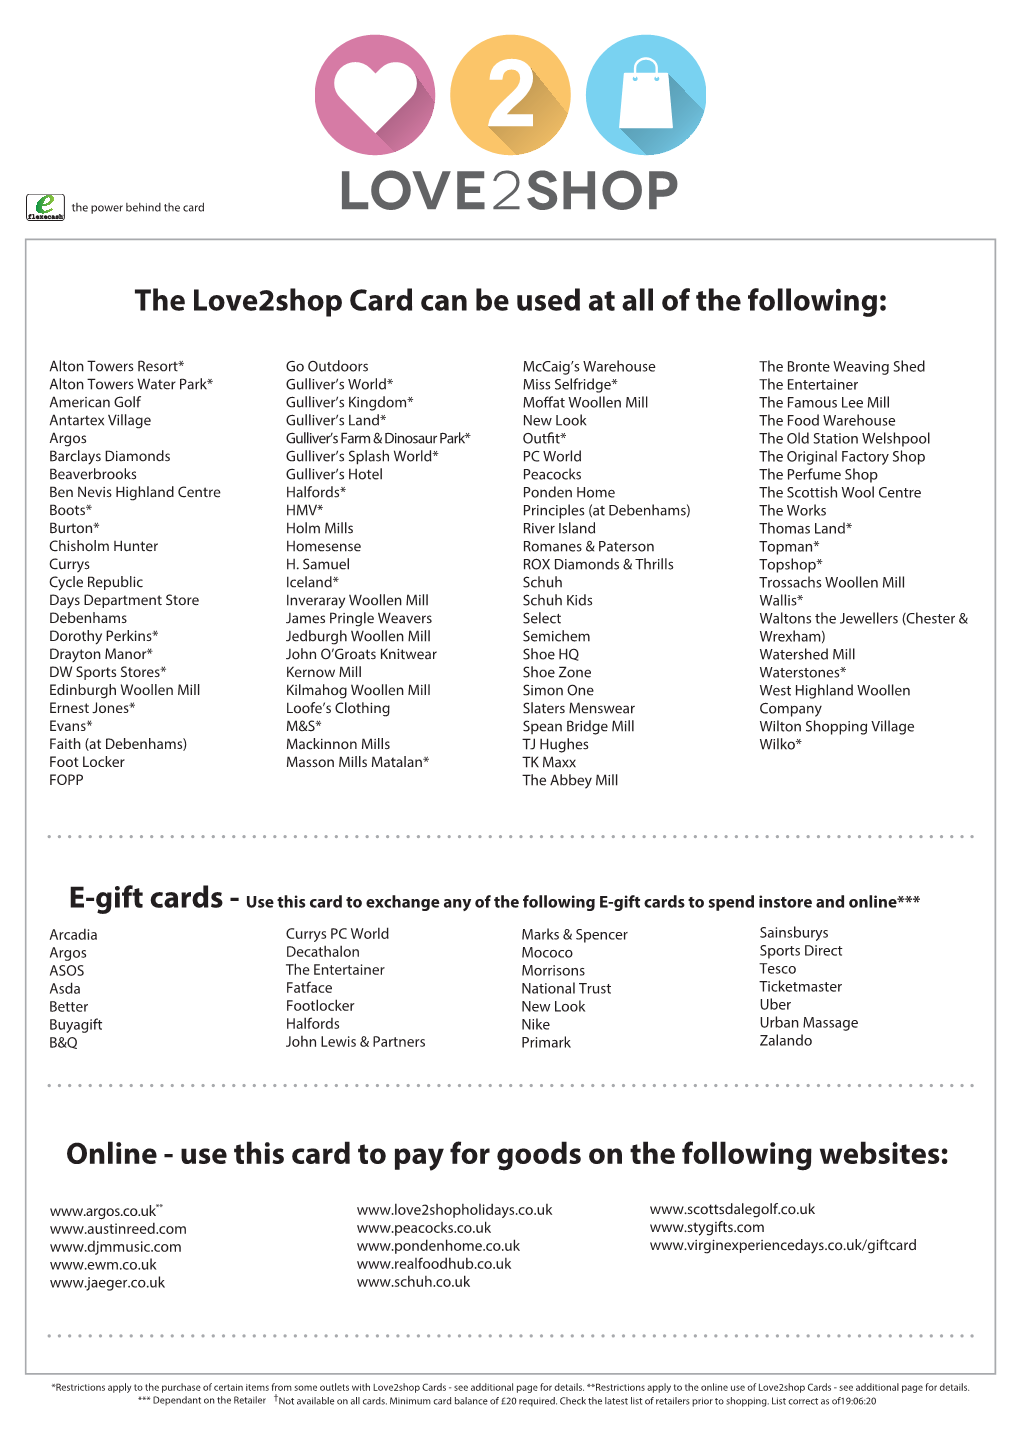 The Love2shop Card Can Be Used at All of the Following: Online